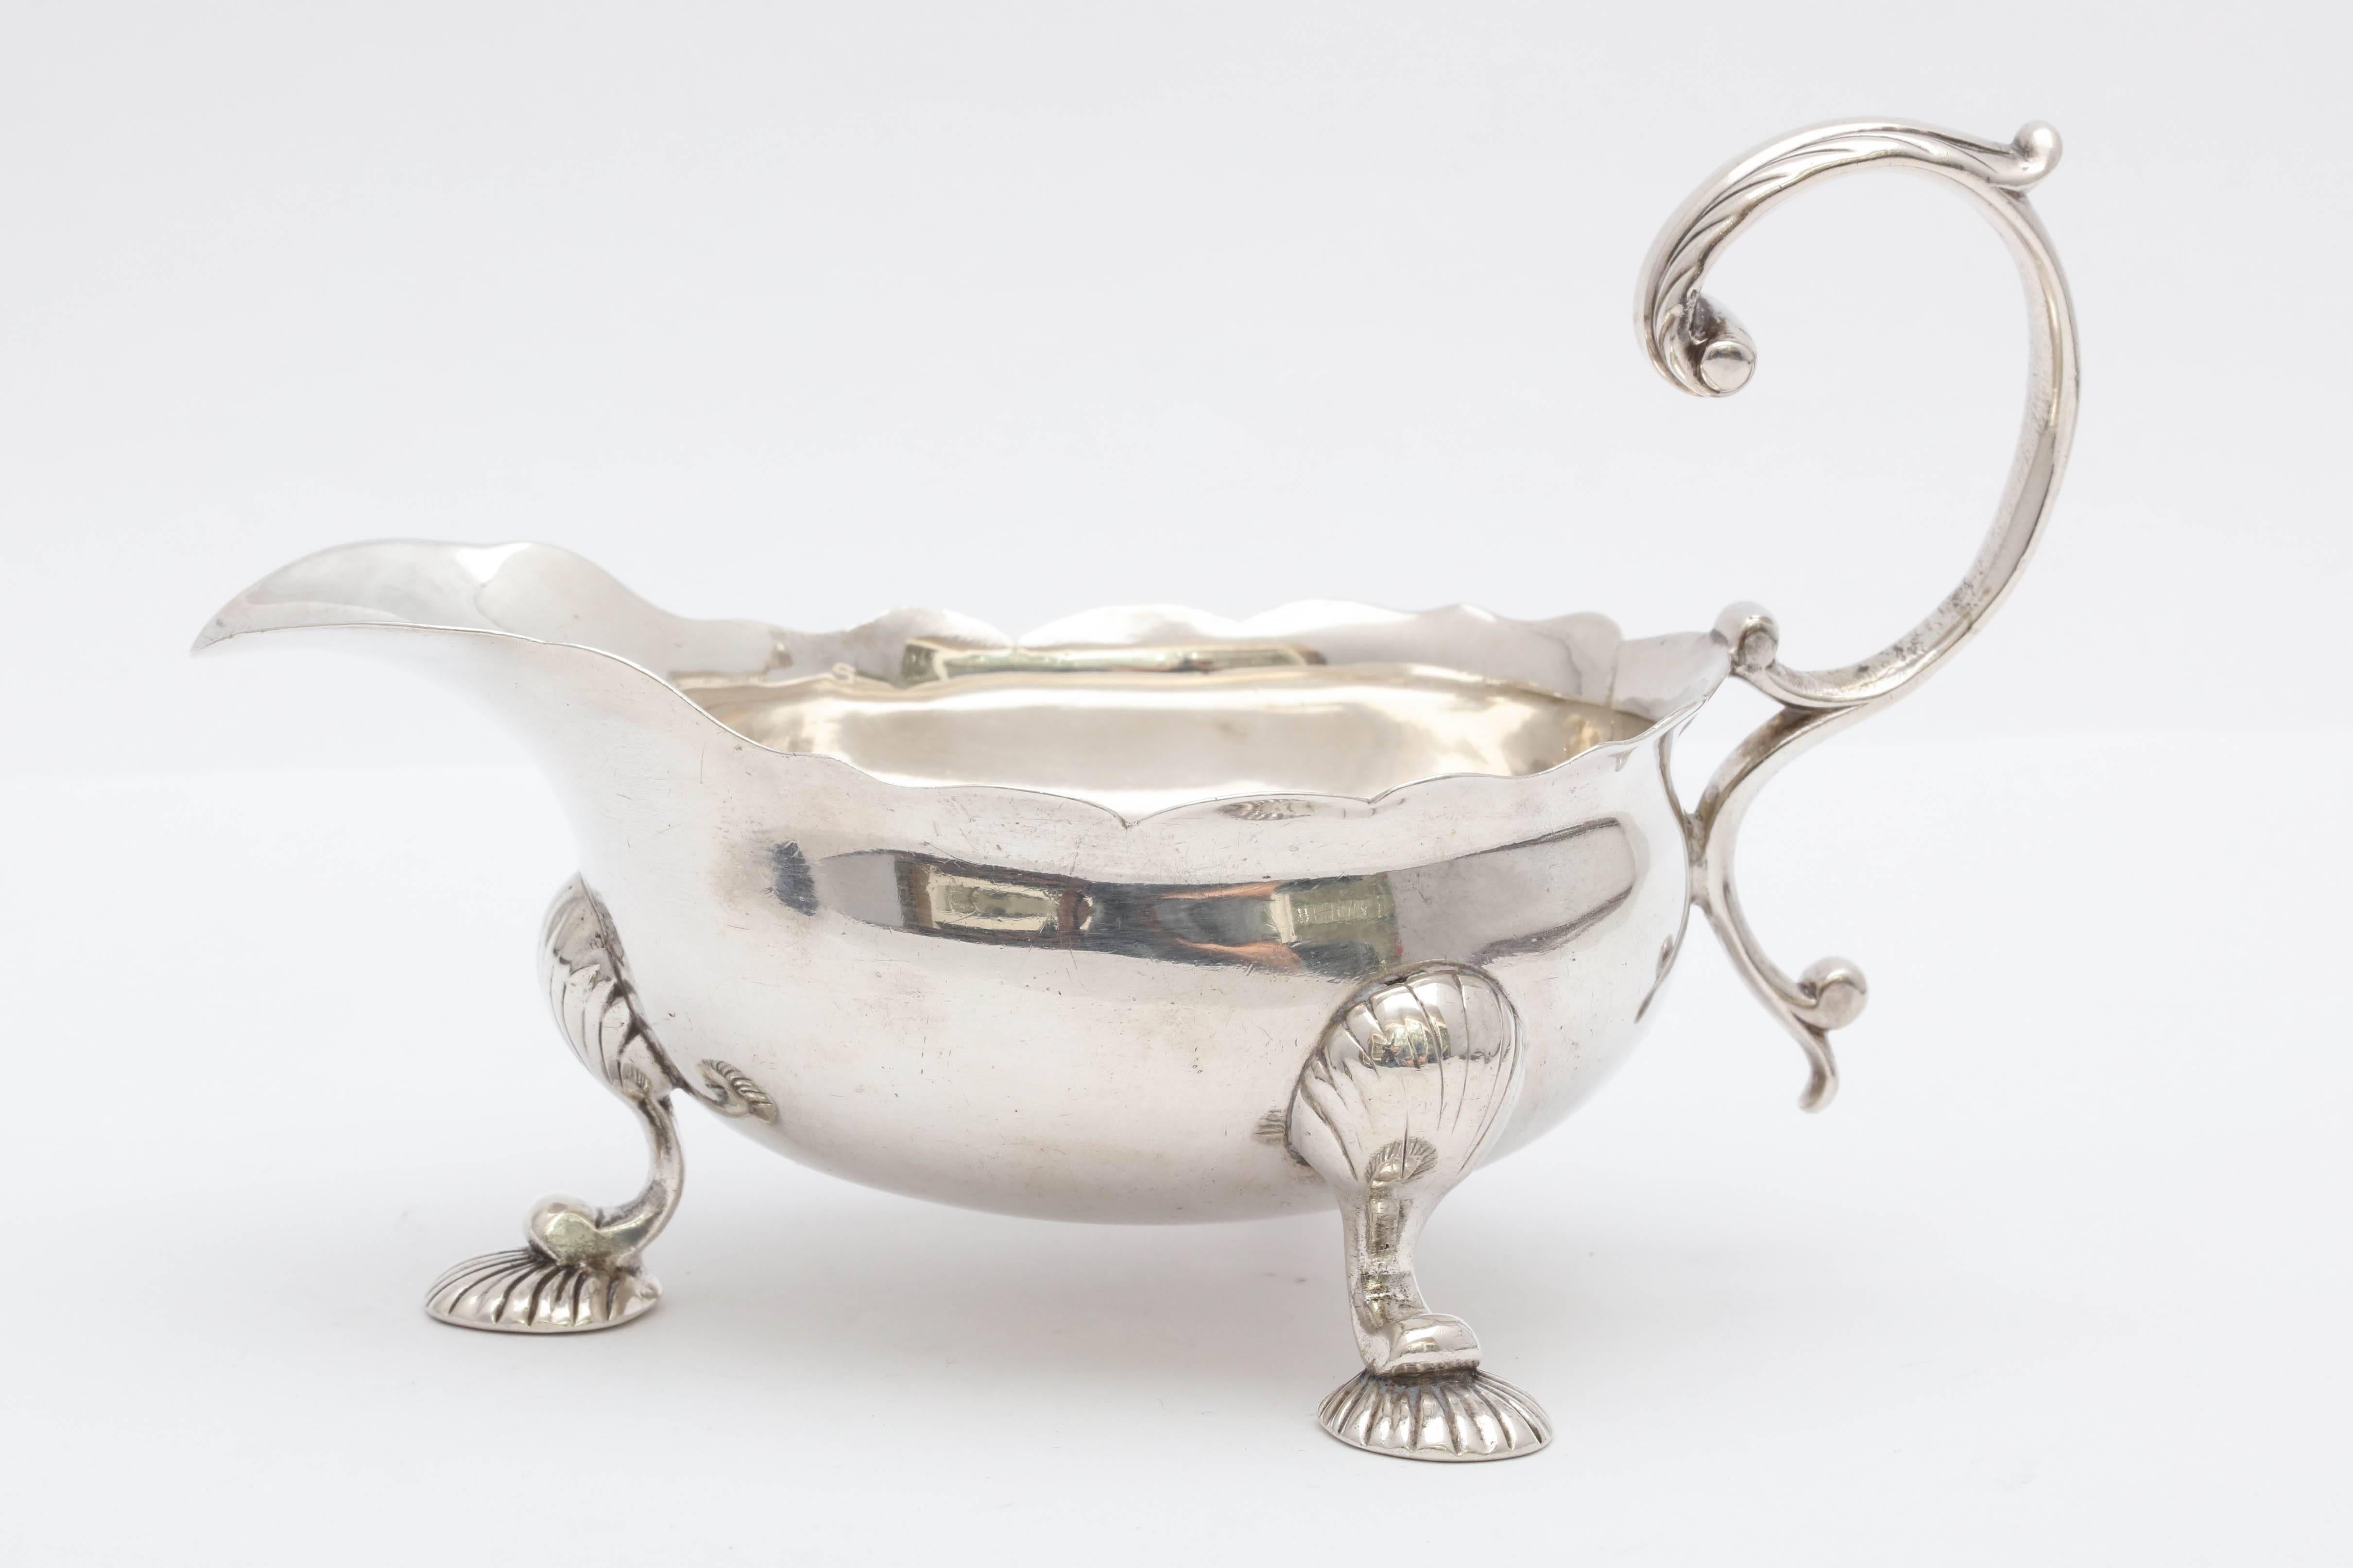 Sterling silver, shell-footed, George II sauce/gravy boat, London, 1753, Samuel Herbert and Co. - makers. Measures 6 inches from edge of handle to edge of spout x 3 1/2 inches deep (edge of foot to edge of foot) at deepest point x 3 1/2 inches high